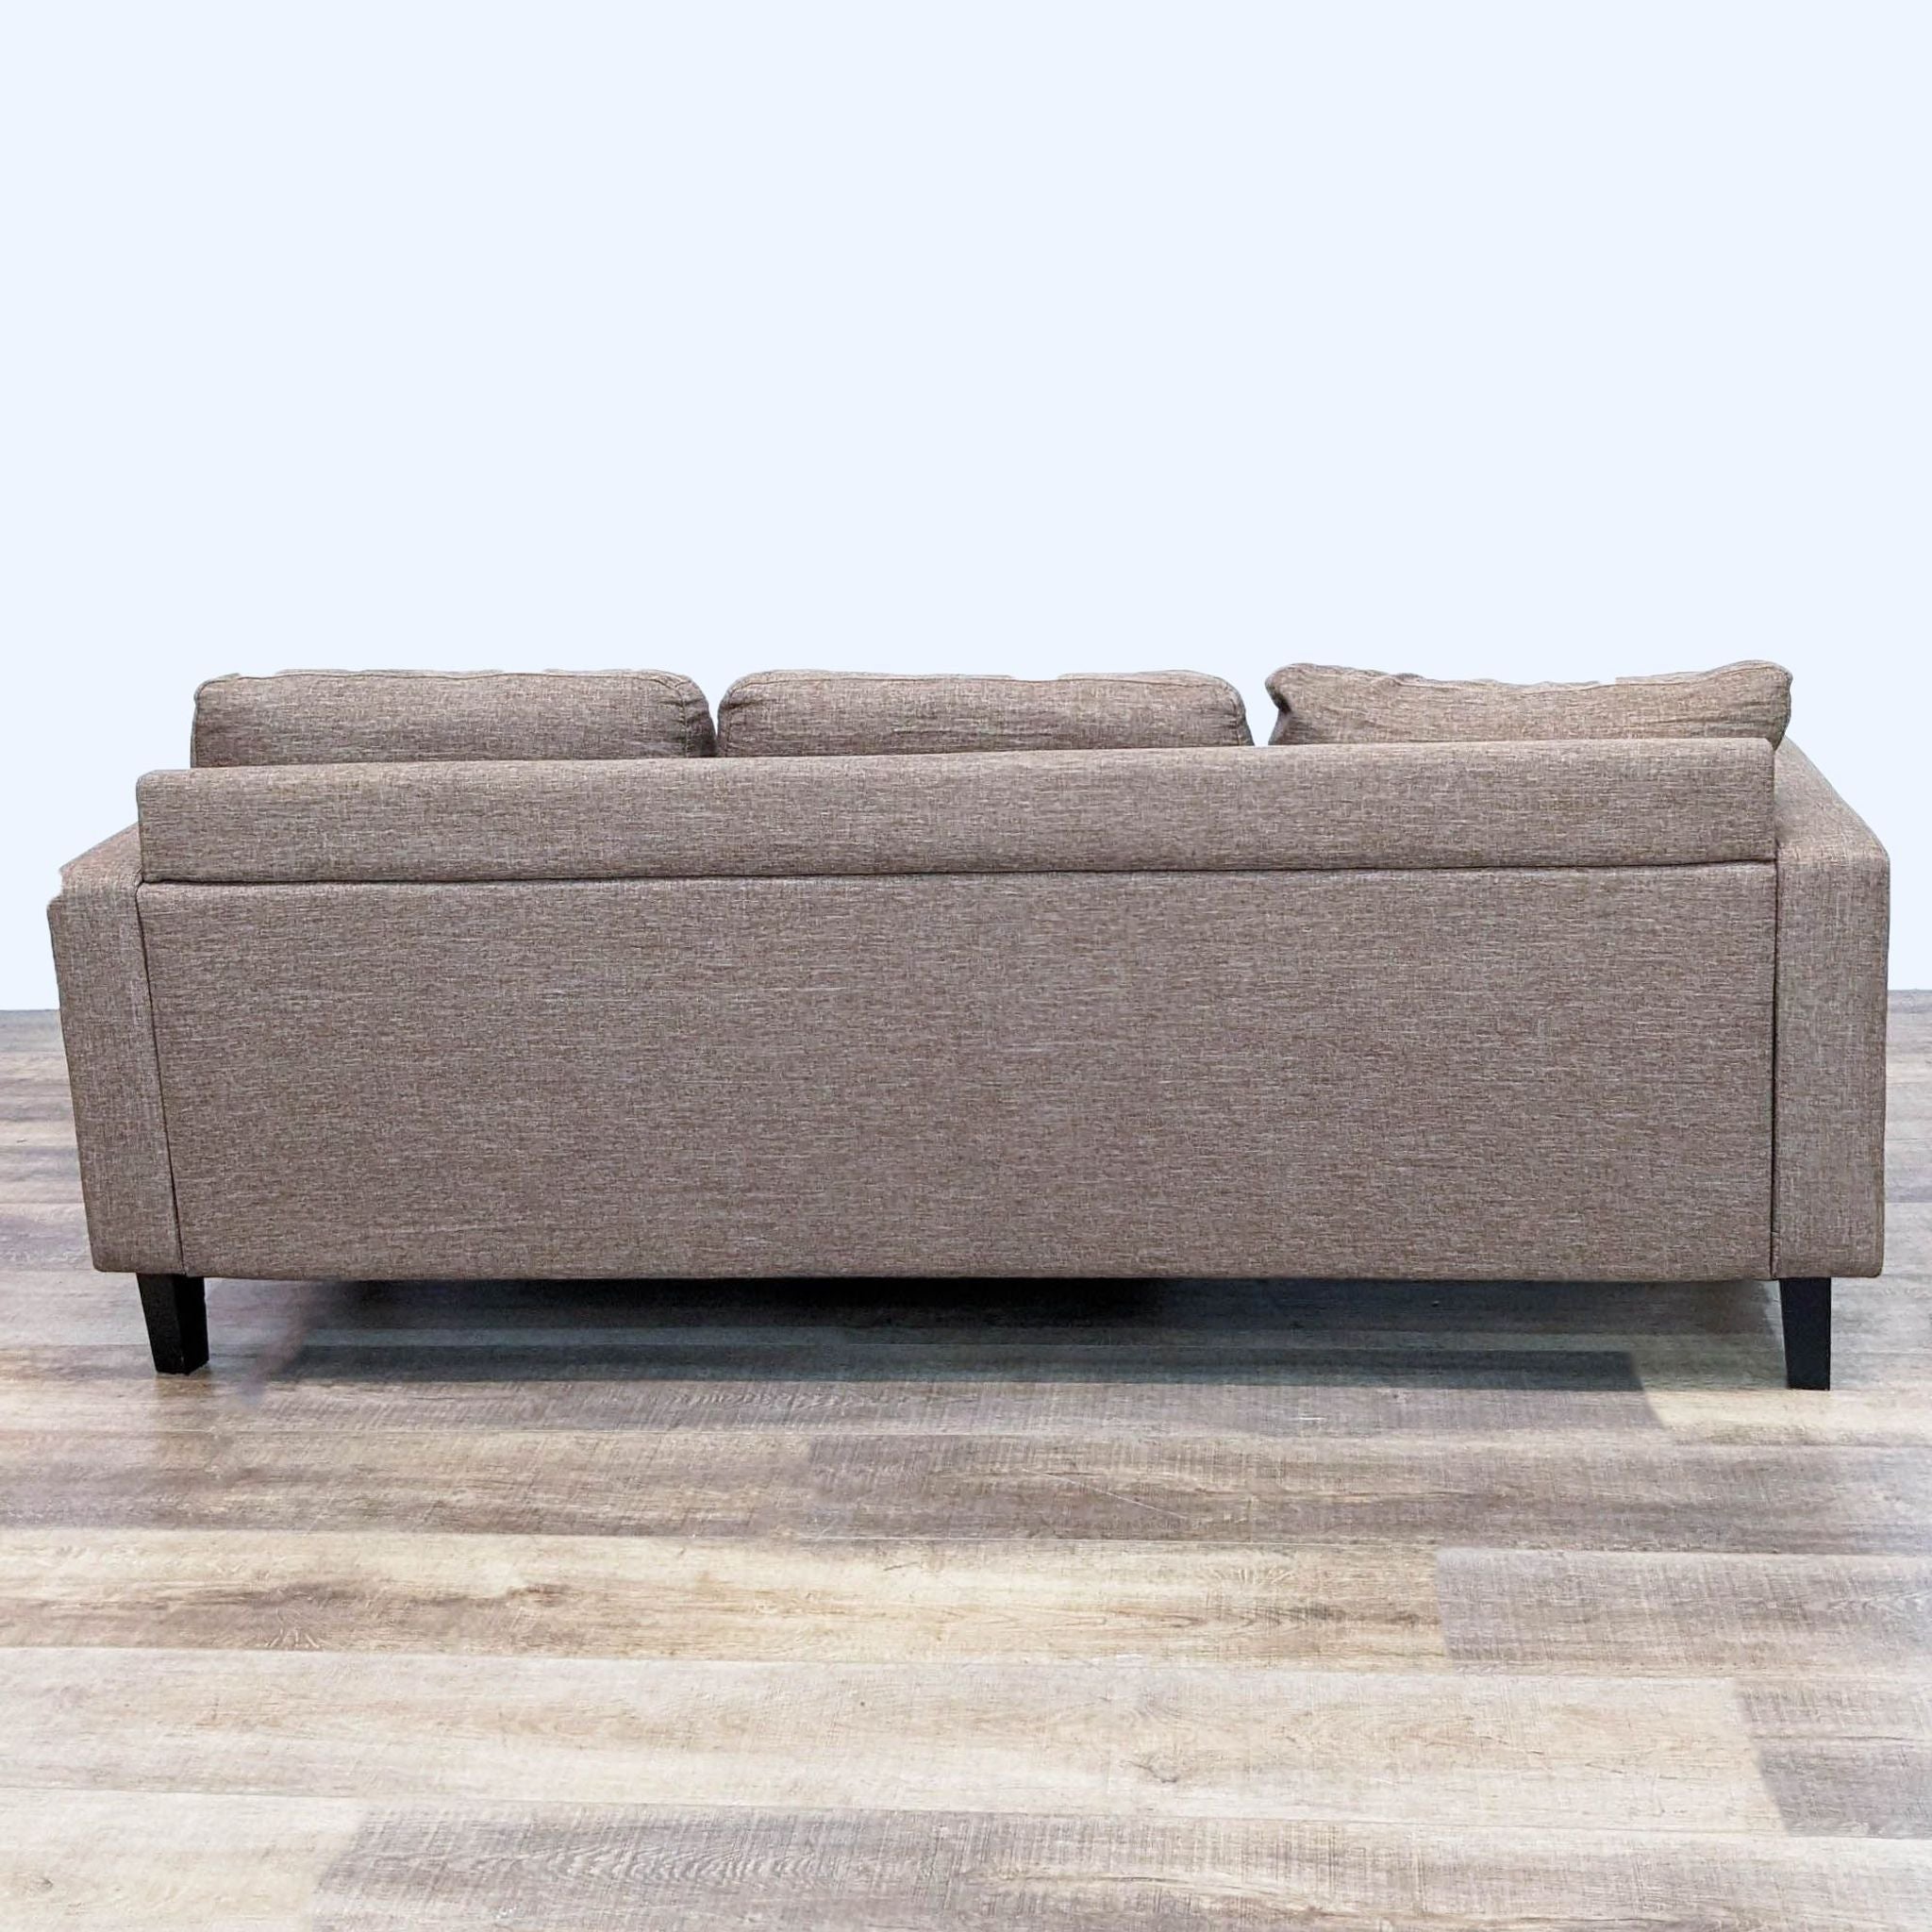 Beige Reperch 78" sectional sofa with reversible chaise, narrow arms, and dark feet on wood floor.